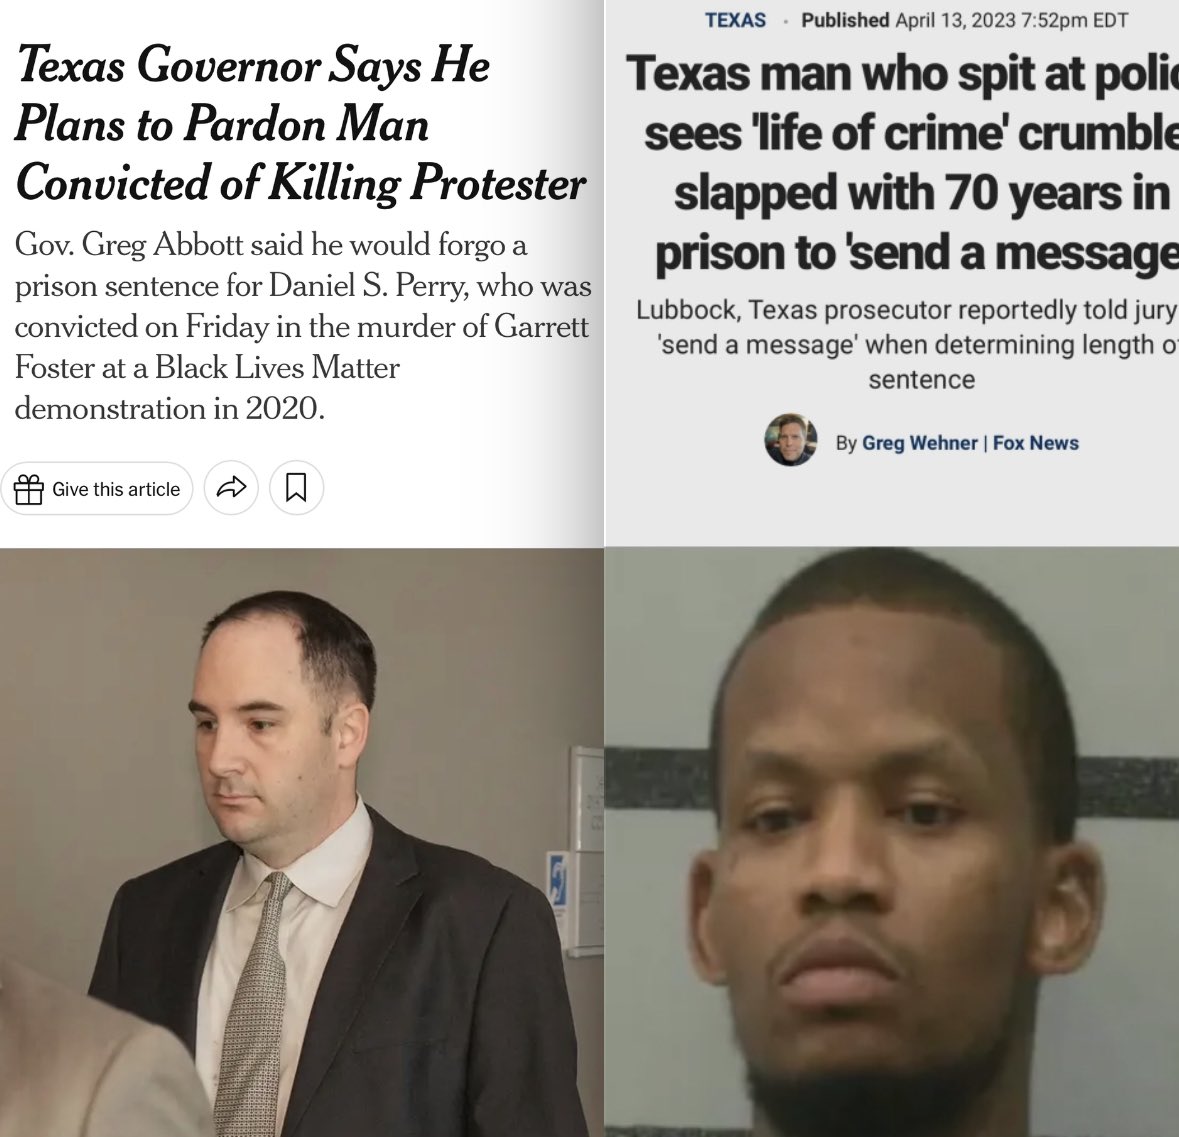 As Texas Gov Abbot prepares to pardon a white man & convicted murderer for killing a peaceful BLM protestor—Texas sentences a Black man to 70 years in prison for “spitting at police” to “make an example out of him.”😳 Systemic white supremacy is thriving in the GOP. Horrific.